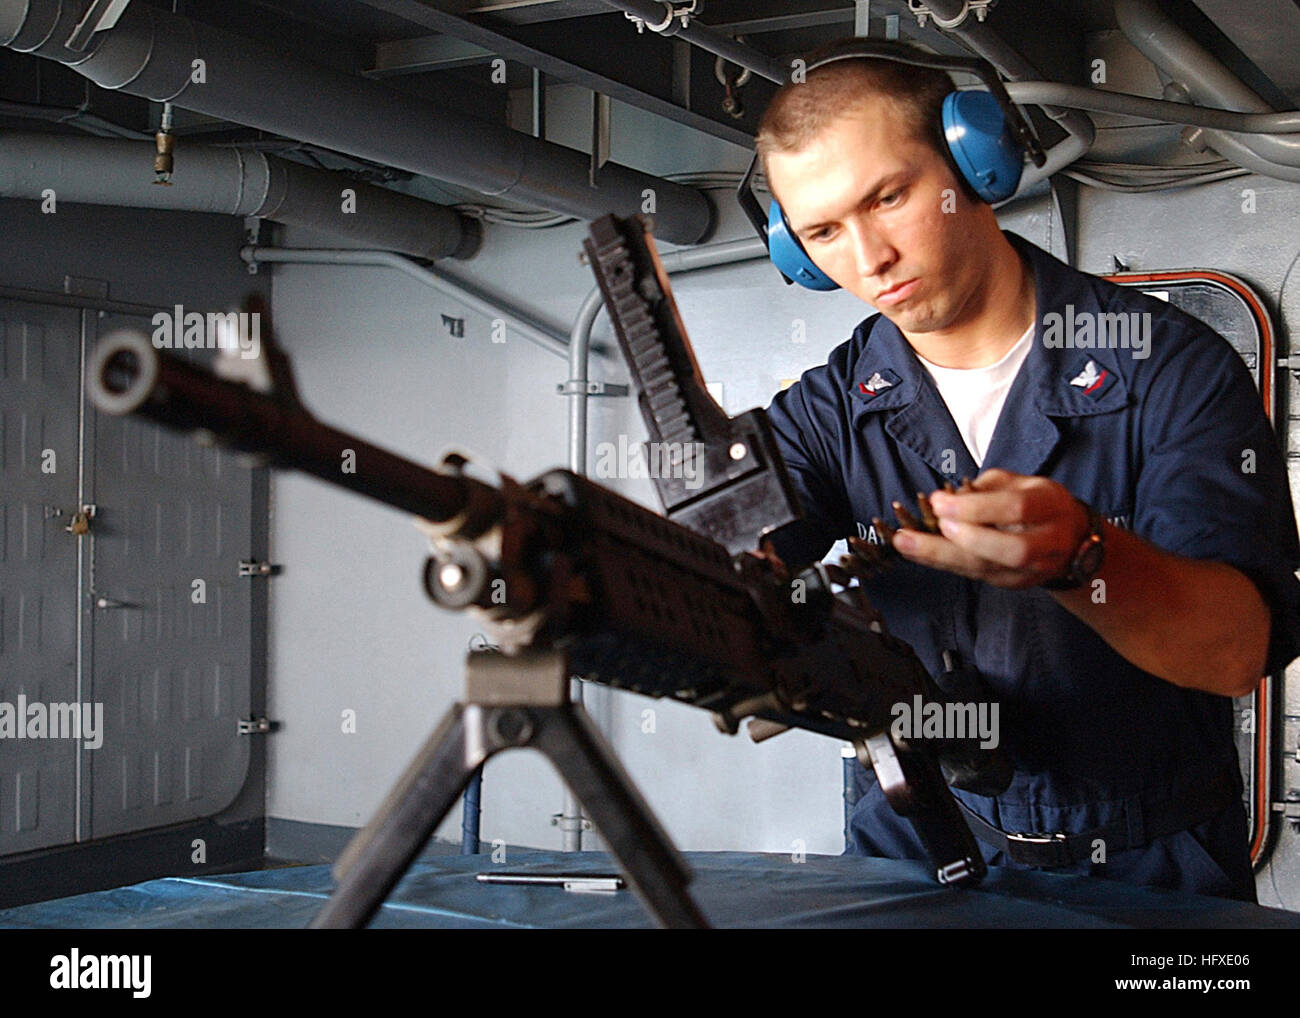 050919-N-0535P-017 Atlantic Ocean (Sept. 19, 2005) - A Sailor practices loading an M-240G medium machine gun during a small arms qualification held aboard the Nimitz-class aircraft carrier USS Harry S. Truman (CVN 75). The M-240 is a 7.62mm, ground-mounted, gas-operated, crew-served machine gun that is replacing the M-60 series machine guns currently in use today. Truman is currently underway conducting routine operations in the Atlantic Ocean. U.S. Navy photo by Photographer's Mate 3rd Class Jay C. Pugh (RELEASED) US Navy 050919-N-0535P-017 A Sailor practices loading an M-240G medium machine  Stock Photo